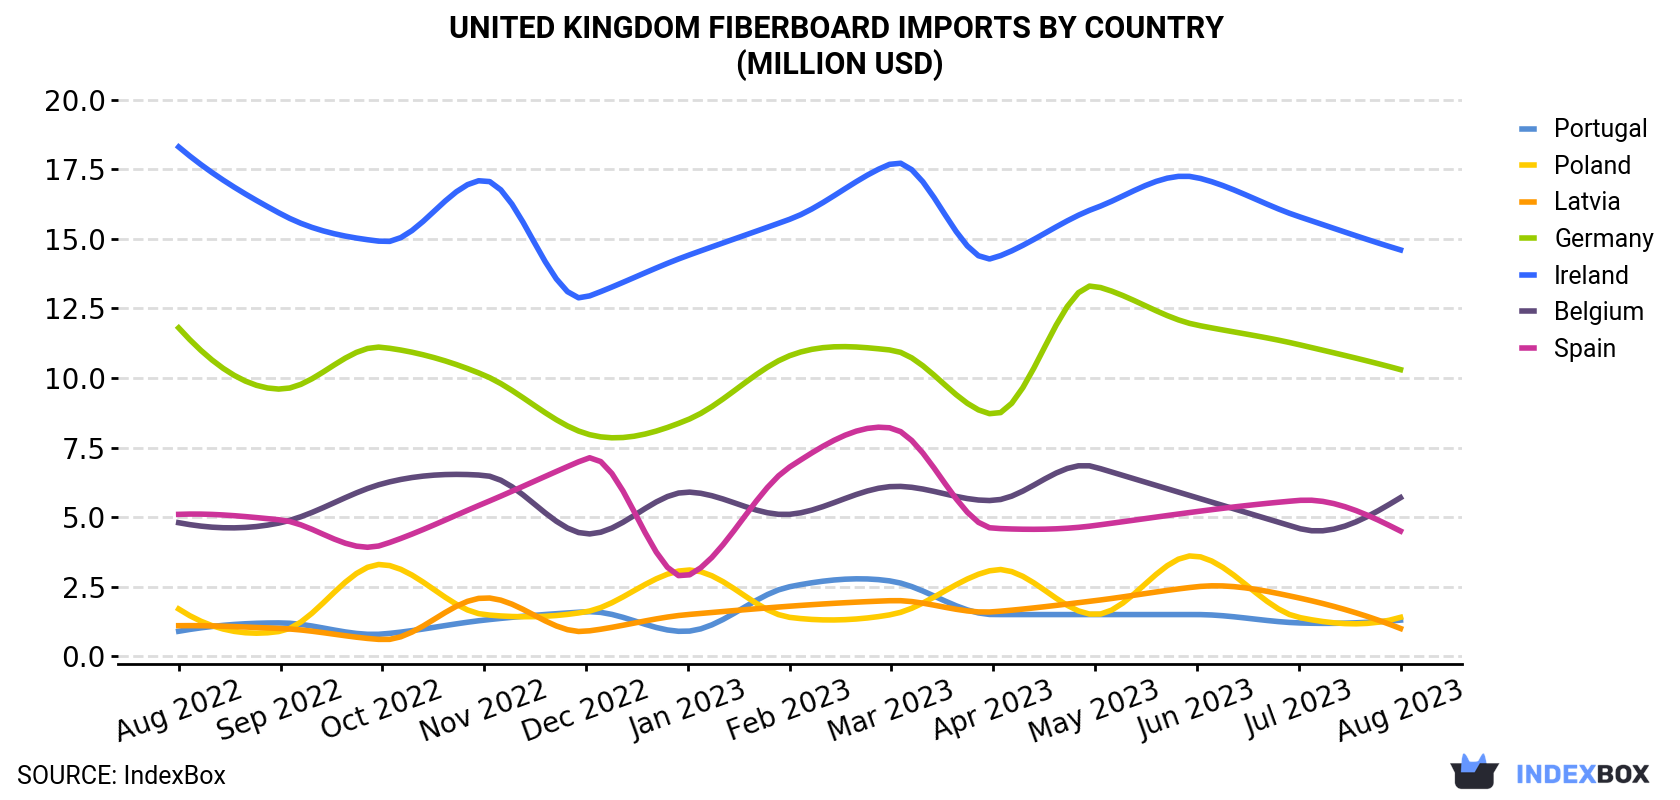 United Kingdom Fiberboard Imports By Country (Million USD)